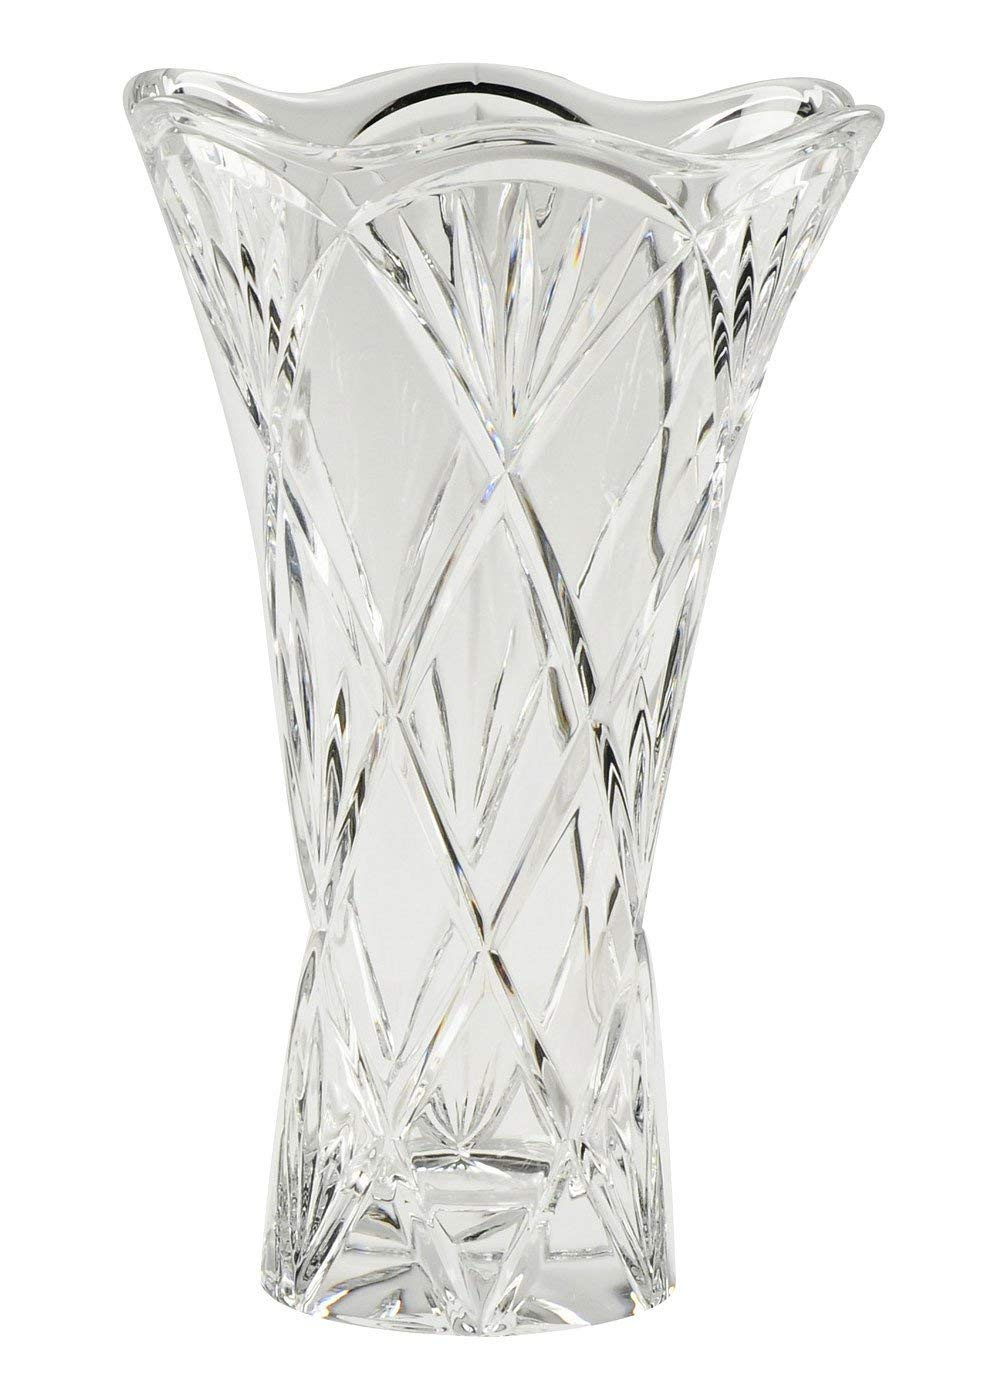 21 Ideal Mikasa Blossom Crystal Vase 2024 free download mikasa blossom crystal vase of amazon com marquis by waterford honour 10 inch vase home kitchen with 71og61b2xnl sl1400